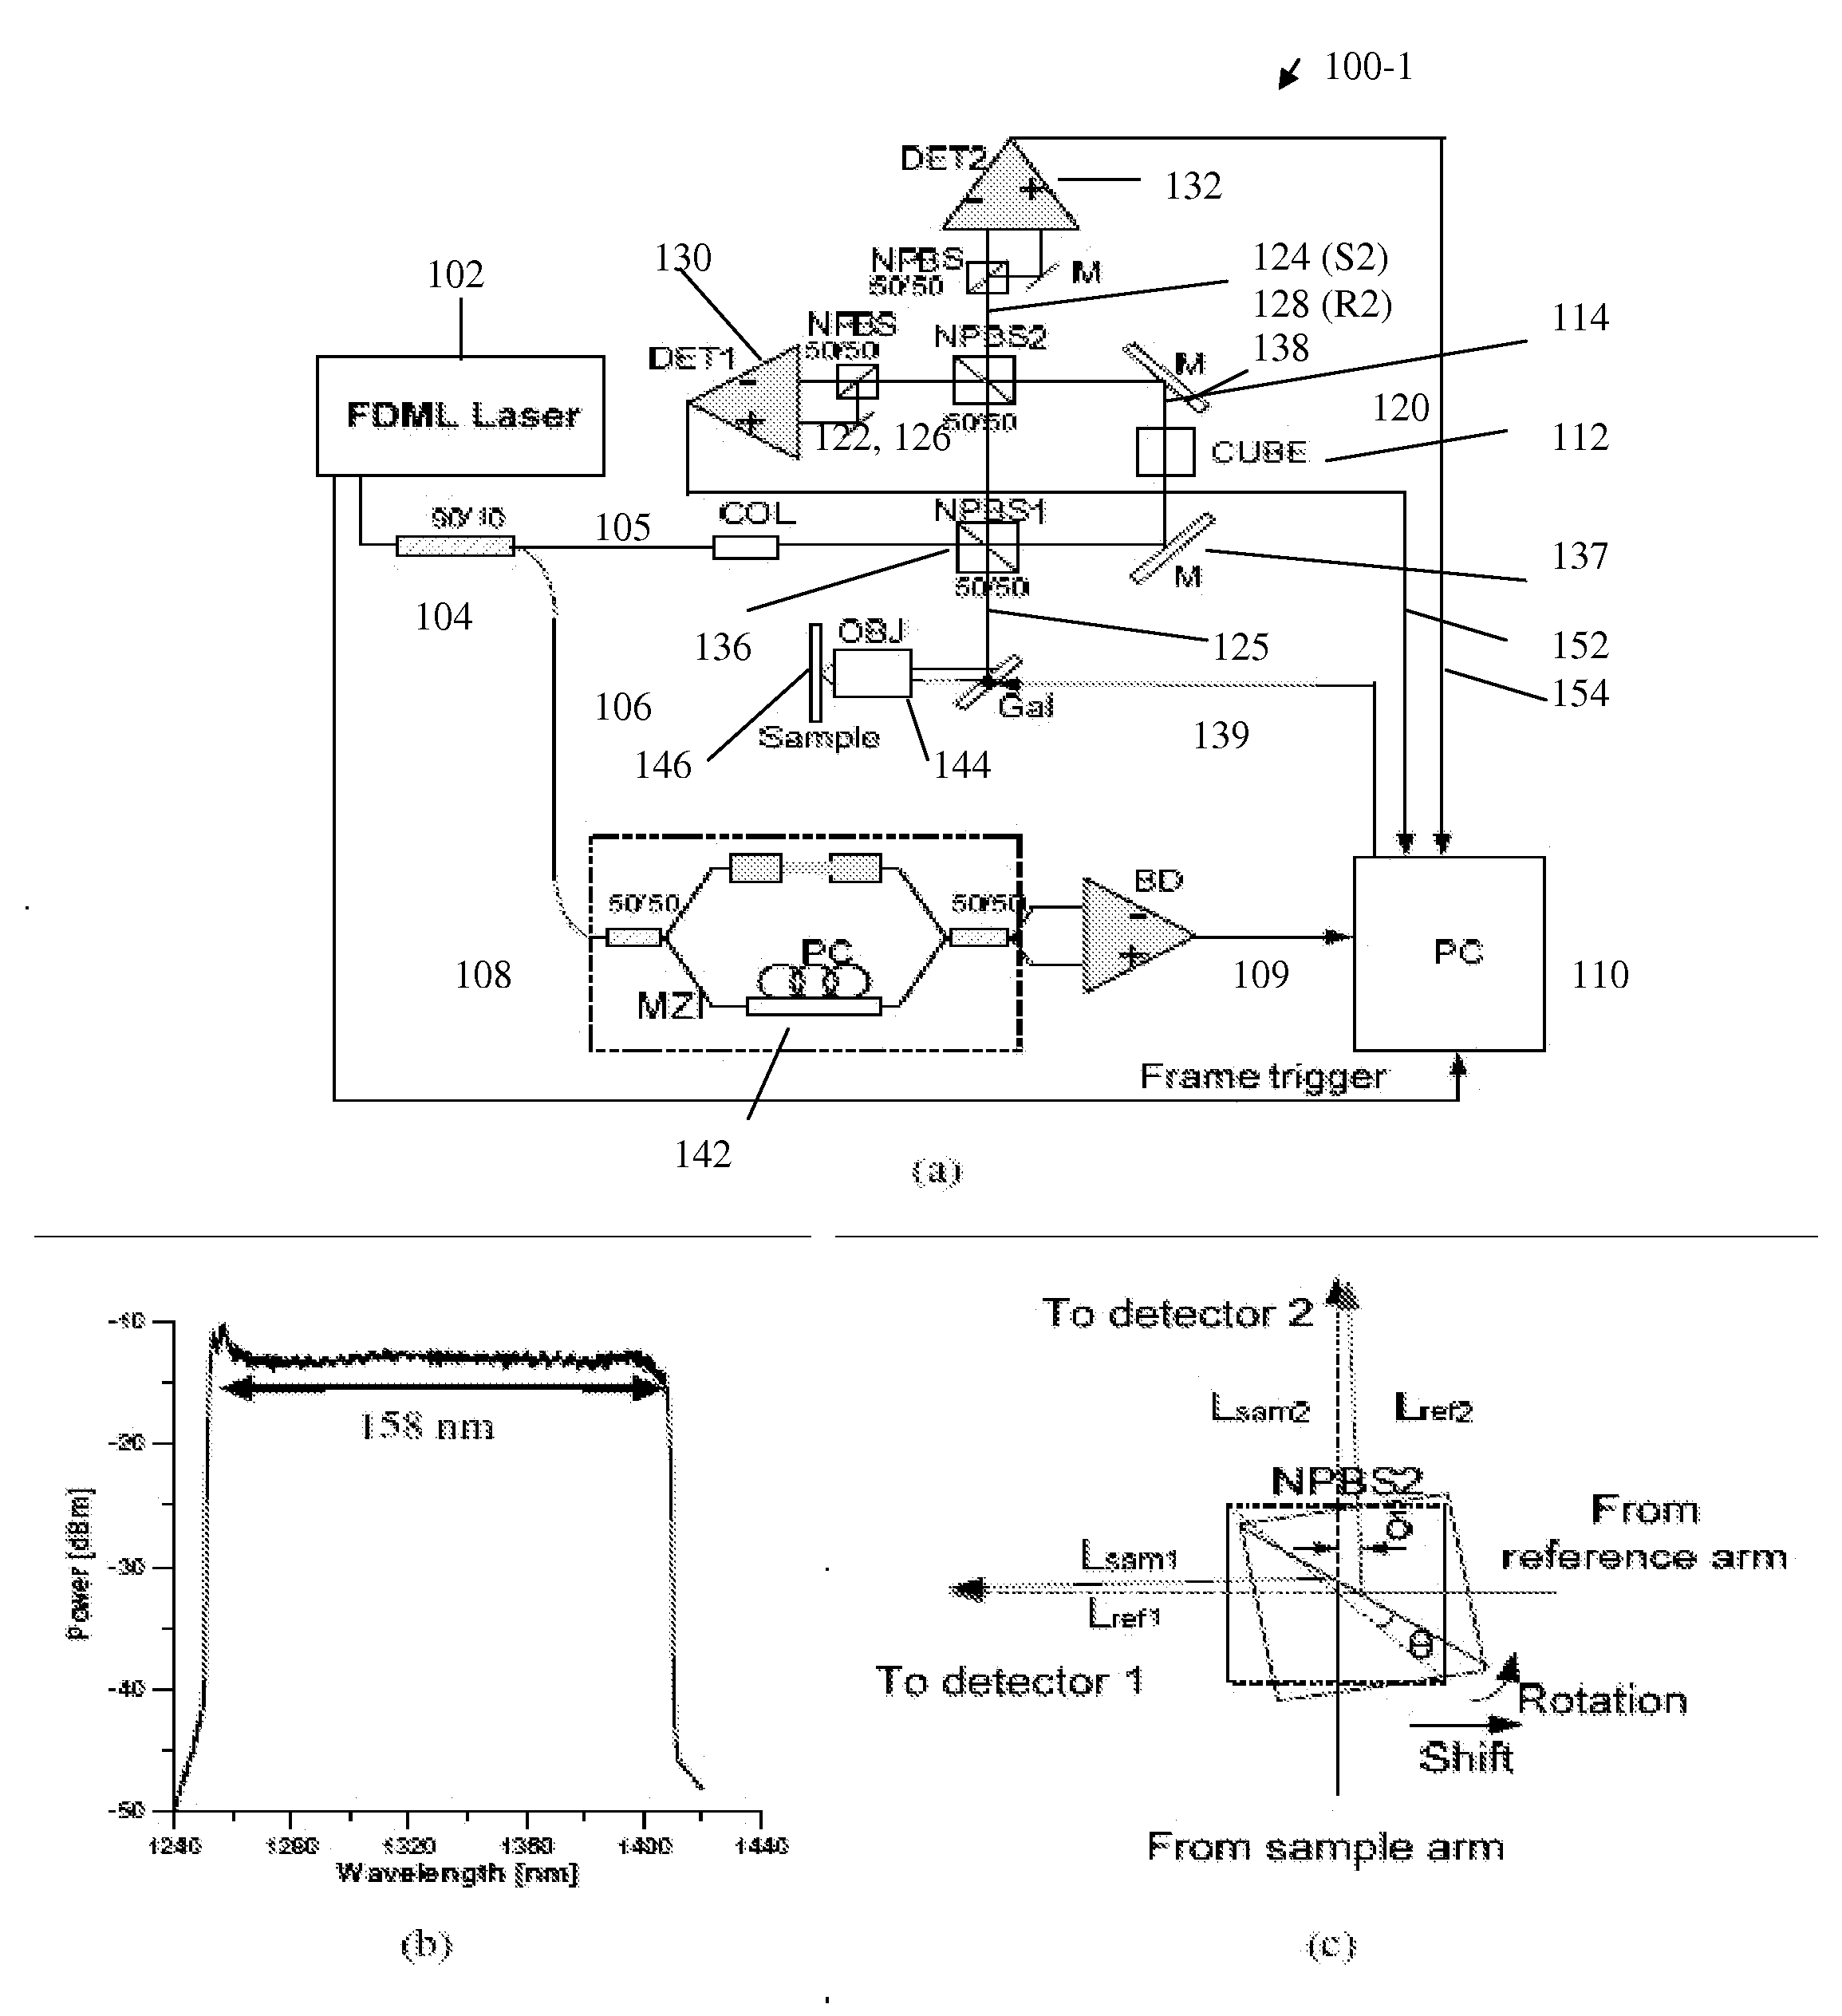 Optical coherence tomography (OCT) apparatus, methods, and applications